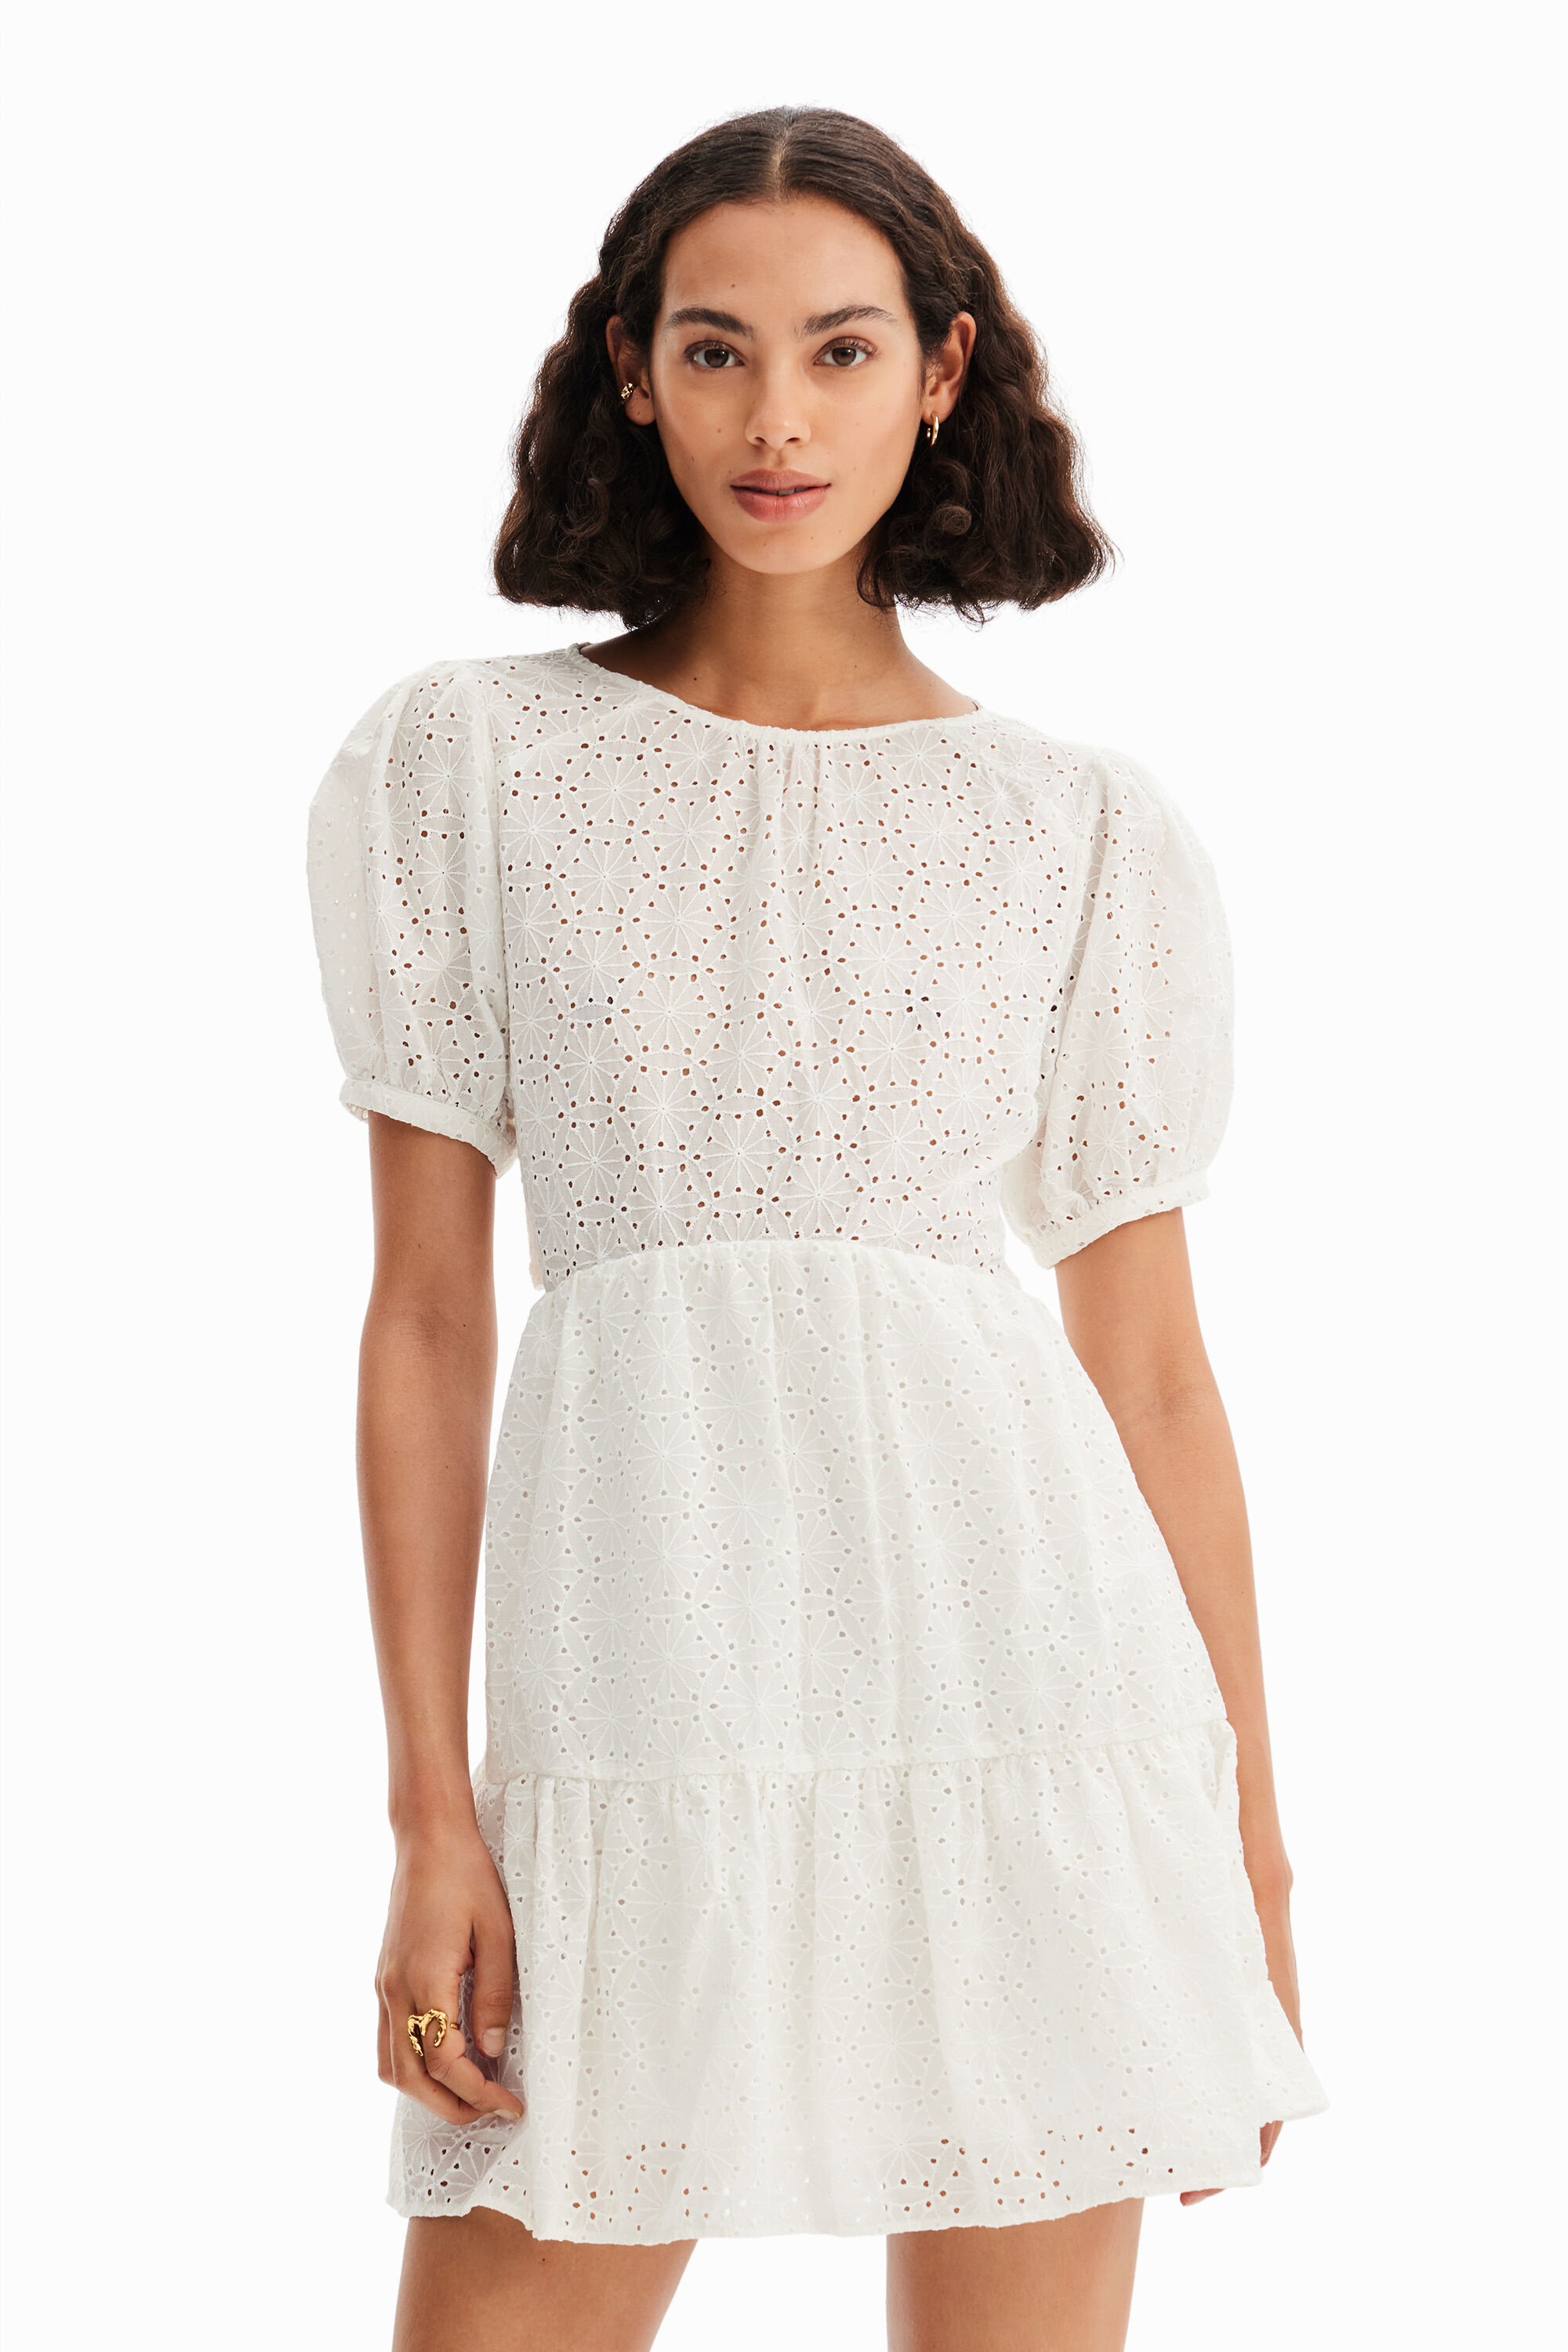 Desigual Short Swiss Embroidery Dress In White